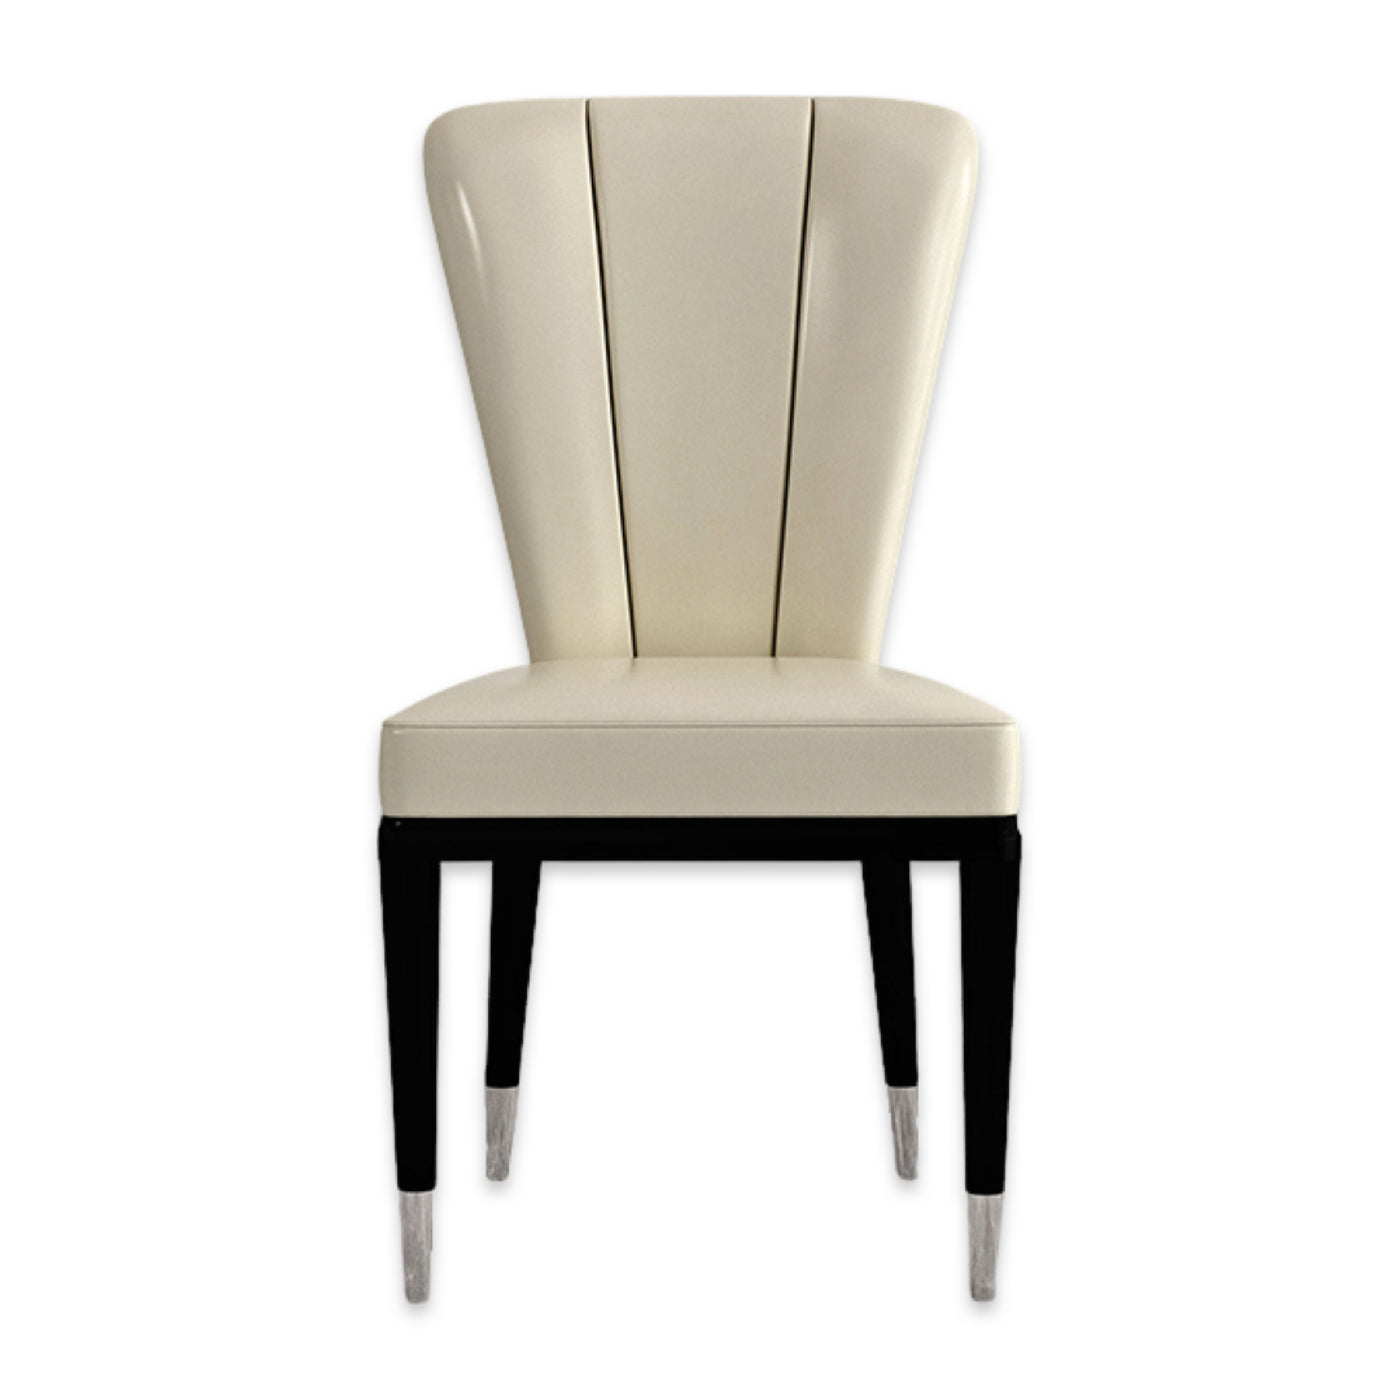 FLORENCE DINING CHAIR